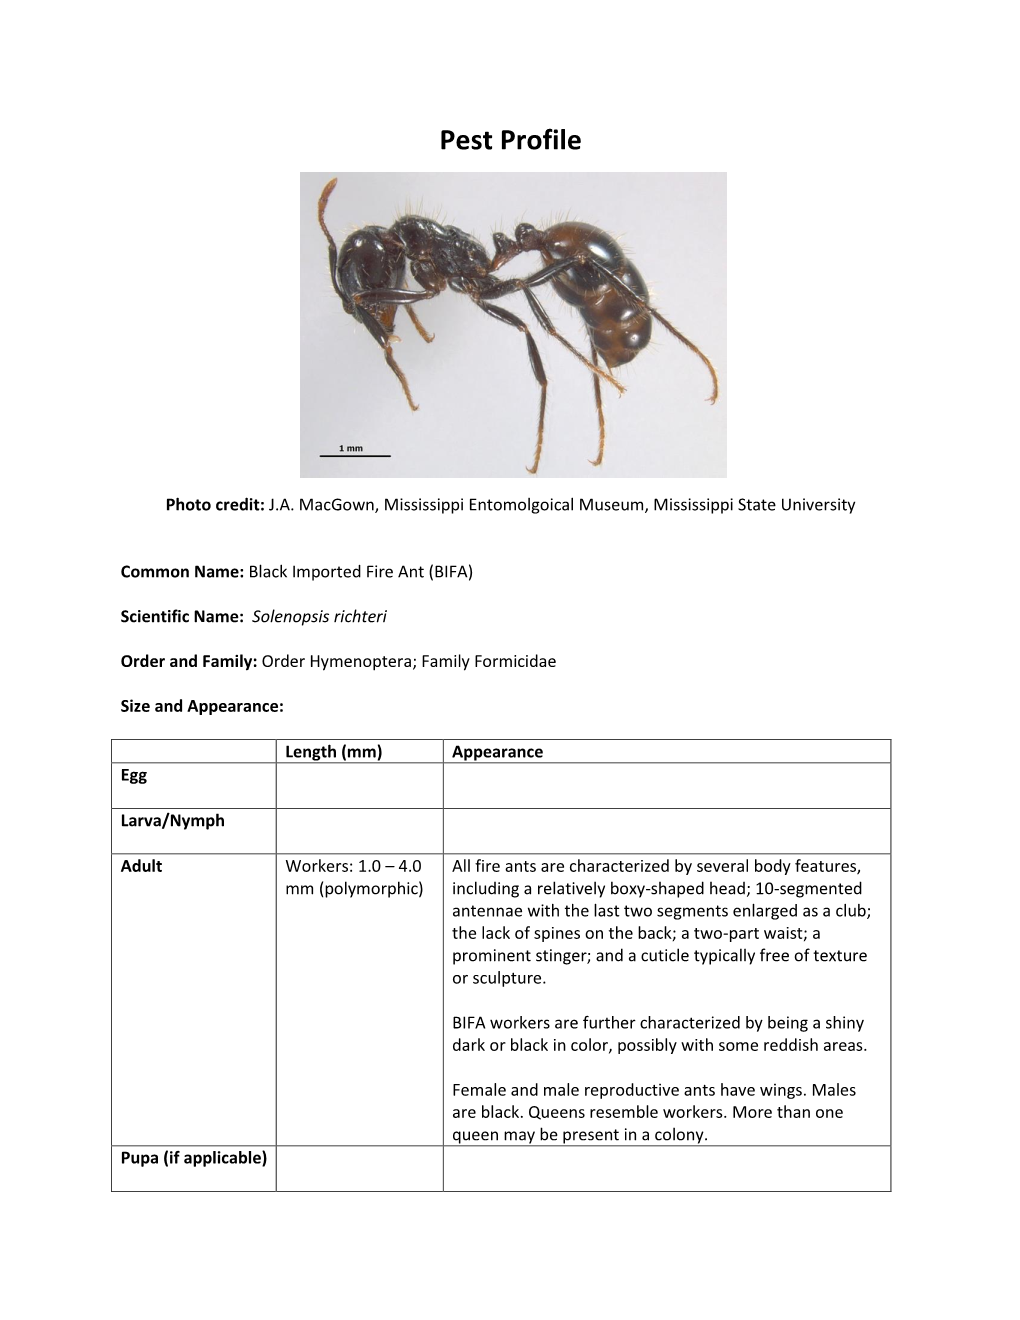 Black Imported Fire Ant (BIFA)